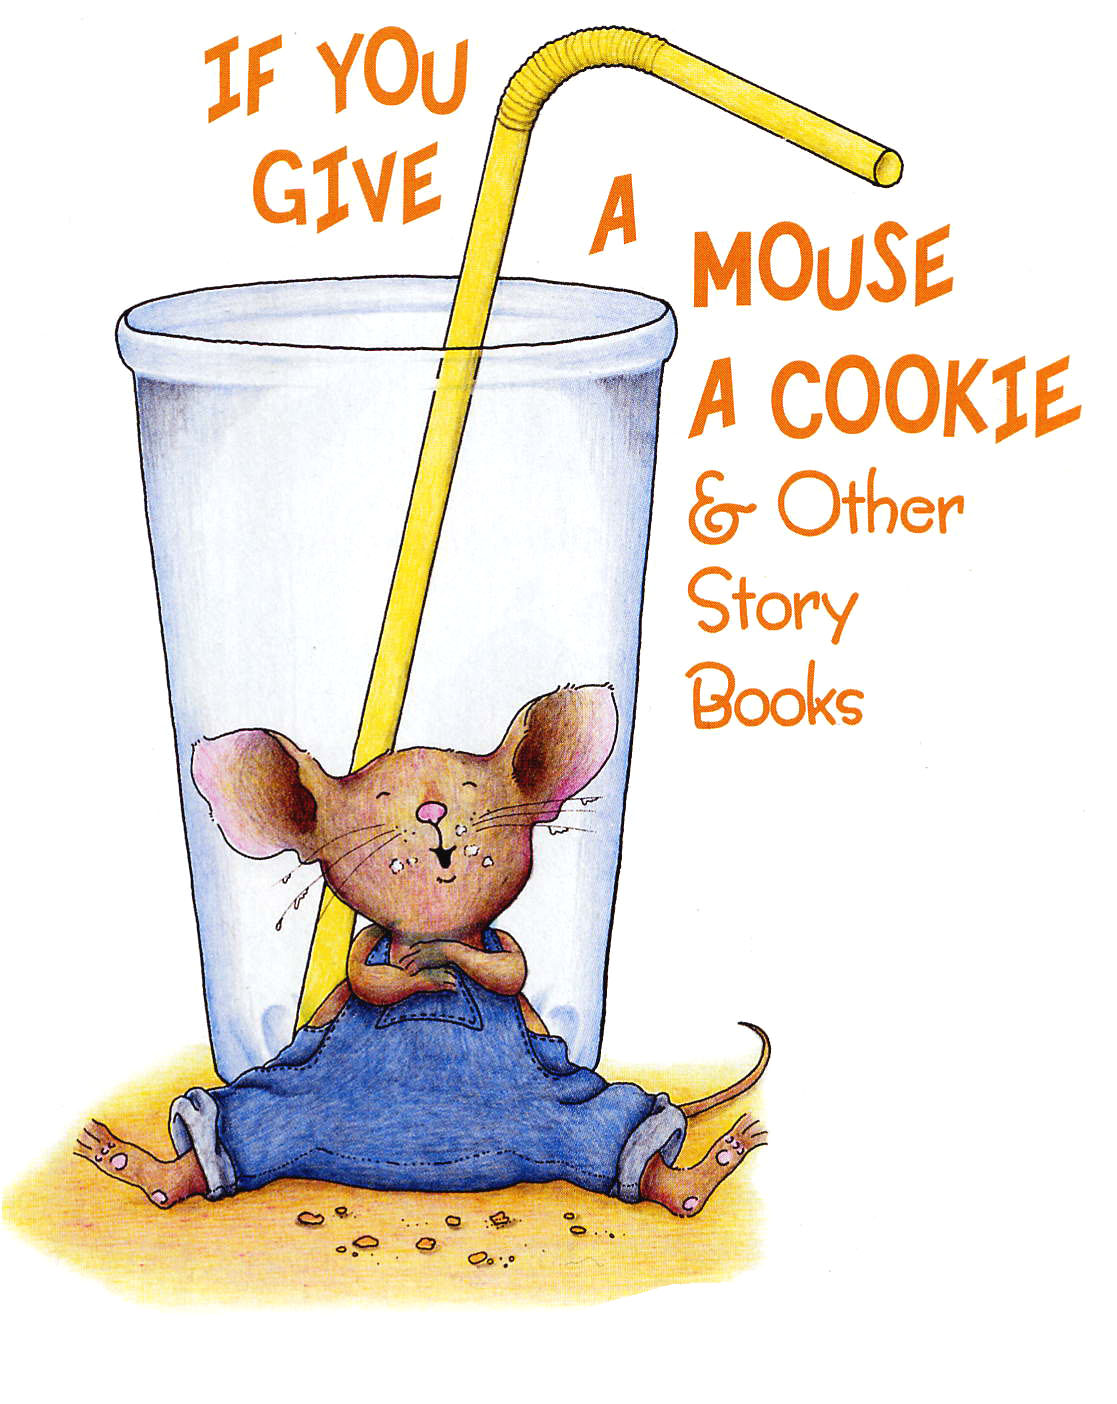 pgh-momtourage-if-you-give-a-mouse-a-cookie-give-a-way